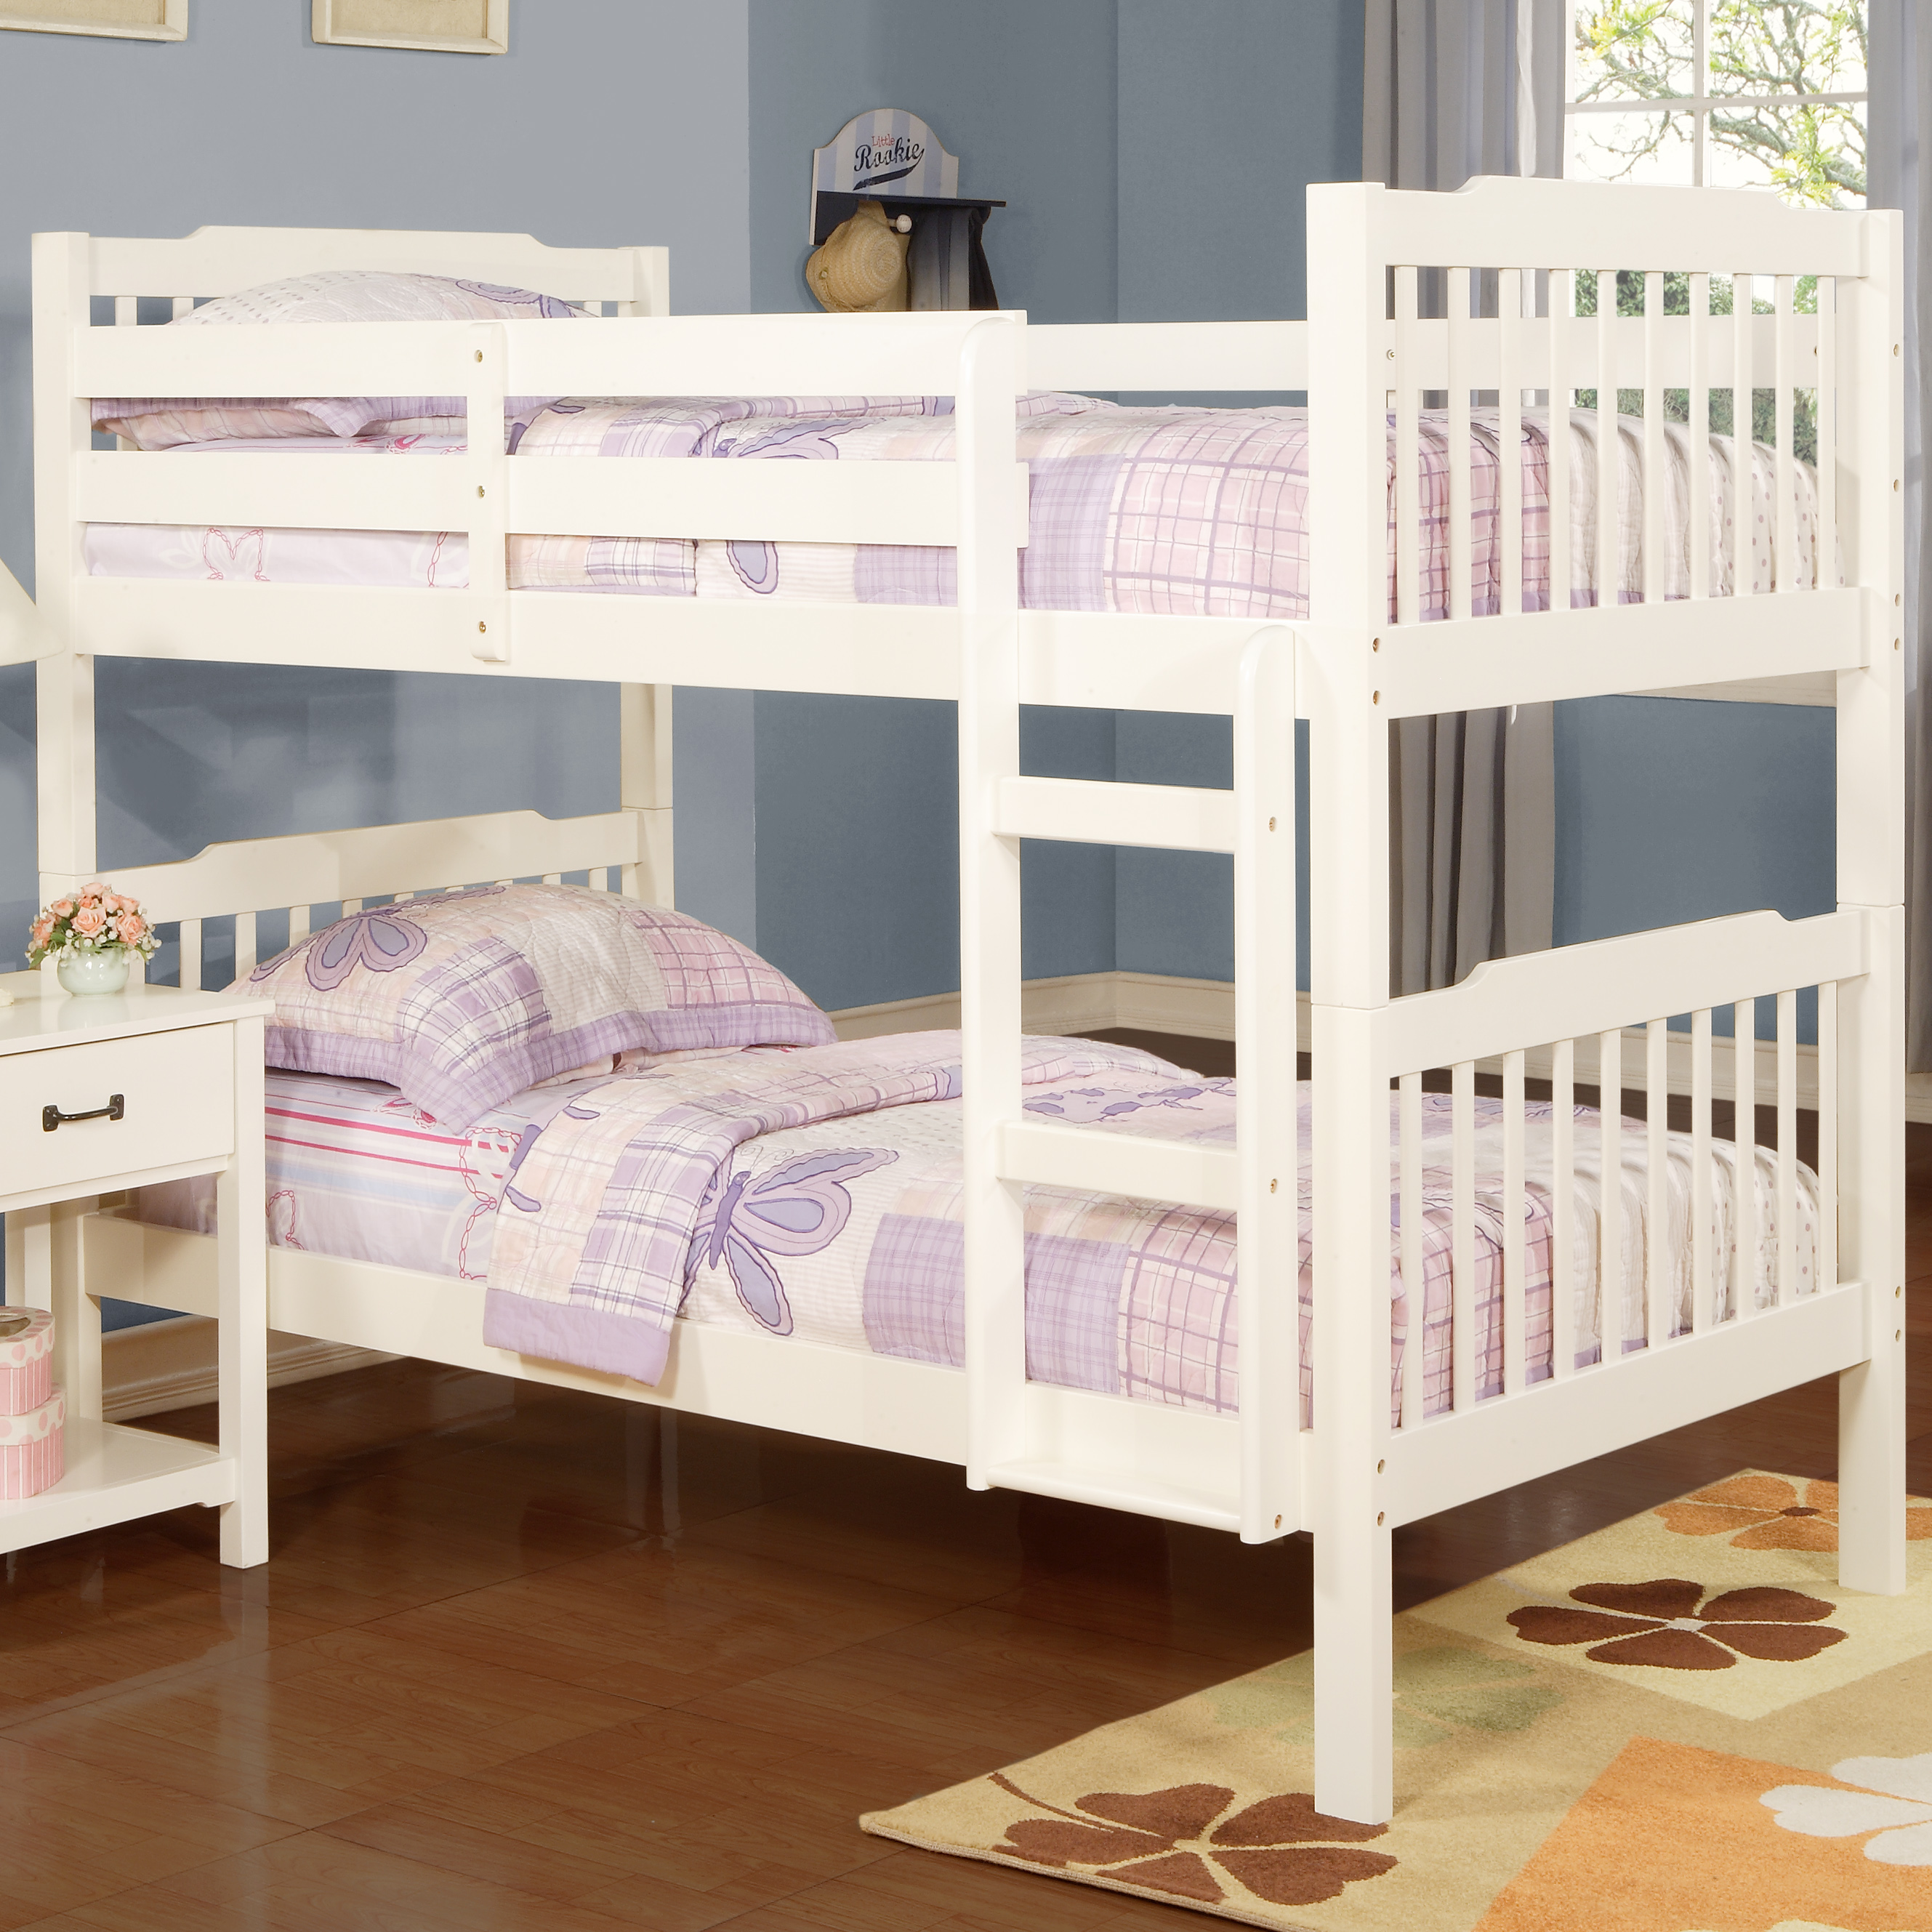 Chelsea Lane Elise Convertible Twin Over Twin Wood Bunk Bed, White - image 5 of 5